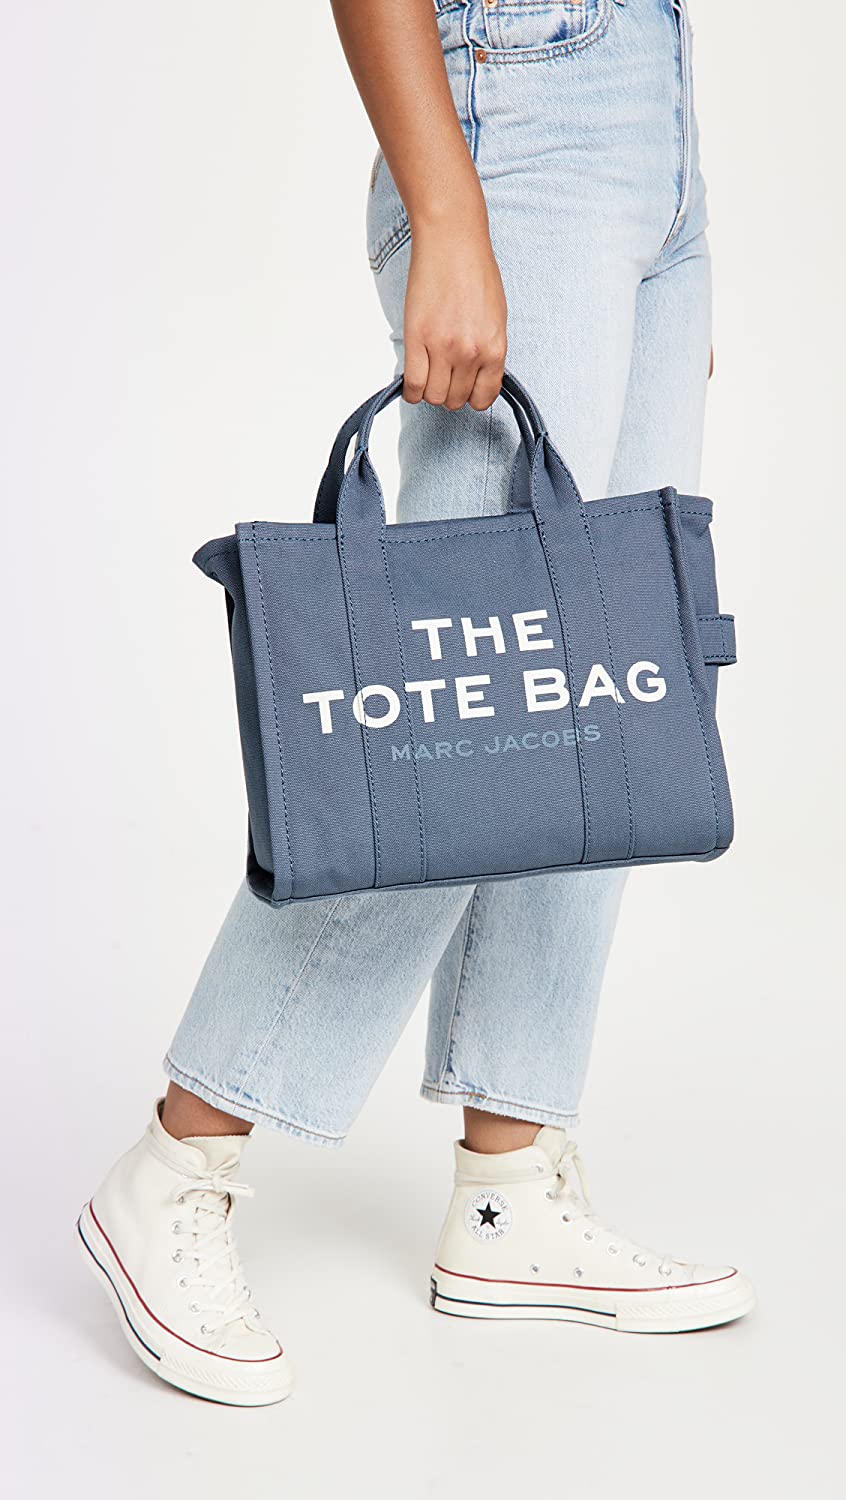 Best The Tote Bag Marc Jacobs